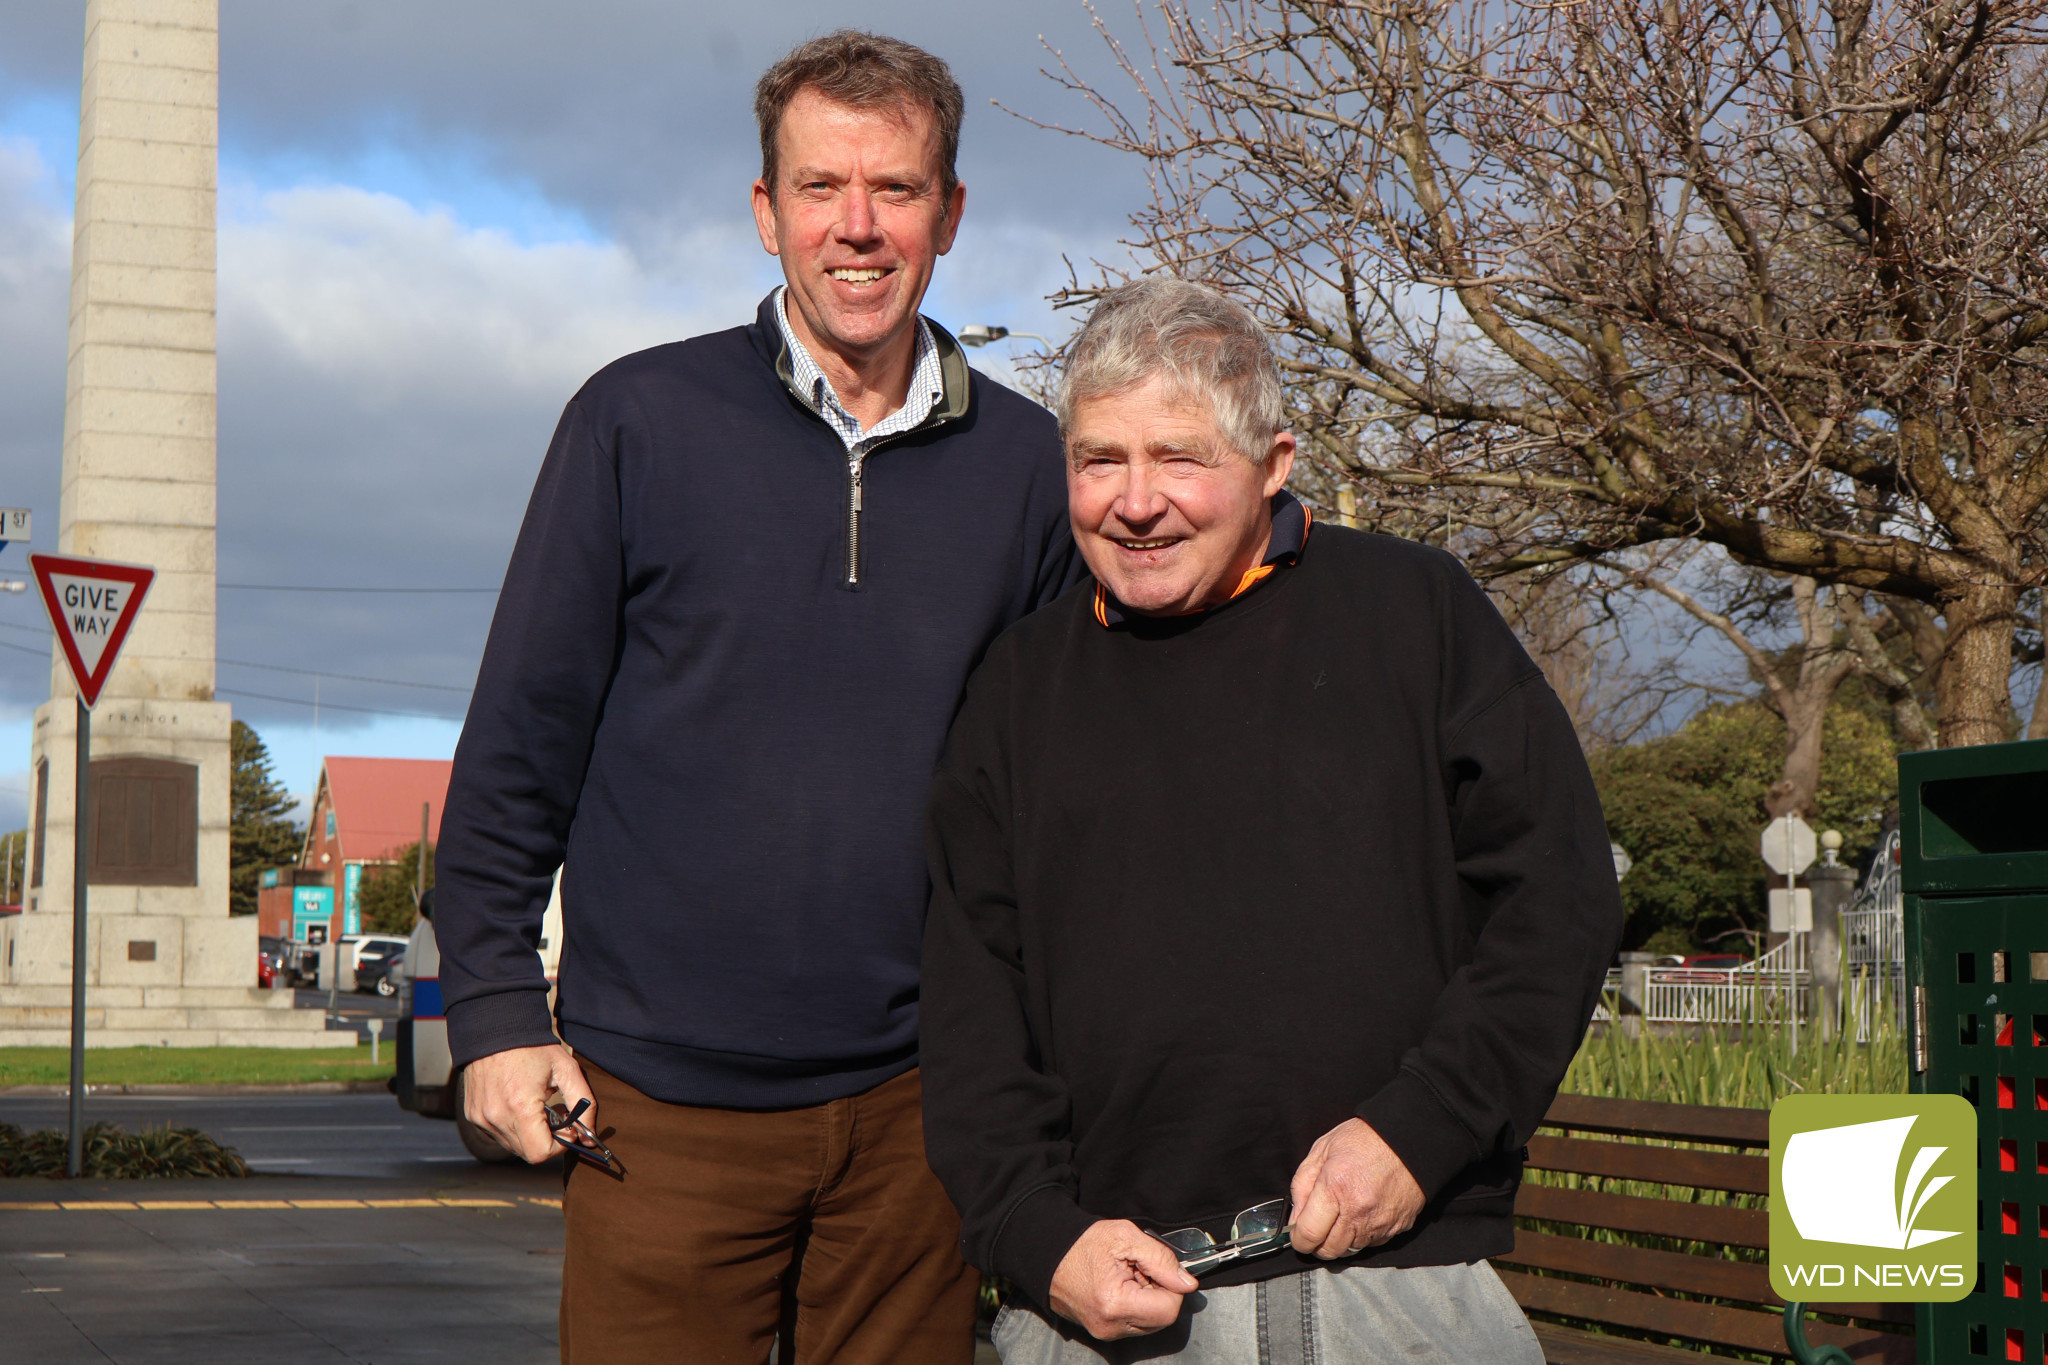 Hands off our hospitals: Member for Wannon Dan Tehan, pictured with Jack Kenna, met with members of the community last week to hear their concerns. Mr Tehan said health services and energy costs were the most commonly raised issues.